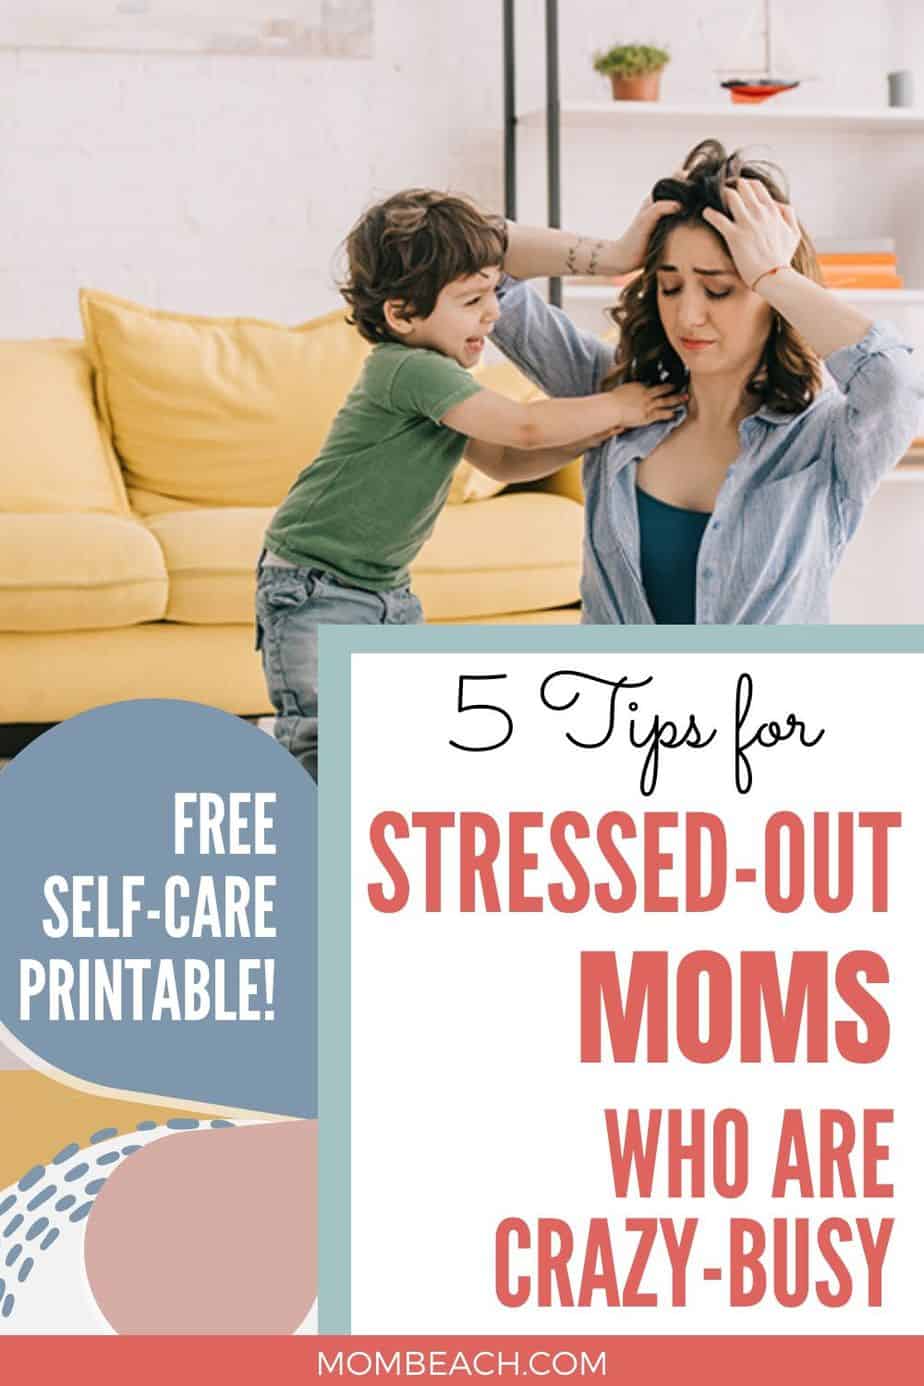 You won't believe how amazing these tips are for stressed-out moms. We have tips for how not to be a stressed out mom and more hacks. It can feel awful when you are stressed out due to your finances, kids, etc. This article is for you if you are feeling stressed and overwhelmed with being a mom. There are 2k words and it is full of information for you. #stressedoutmom #hownottobeastressedoutmom #stressedoutmoms #stressedout #moms #stressedoutmomtips #stress